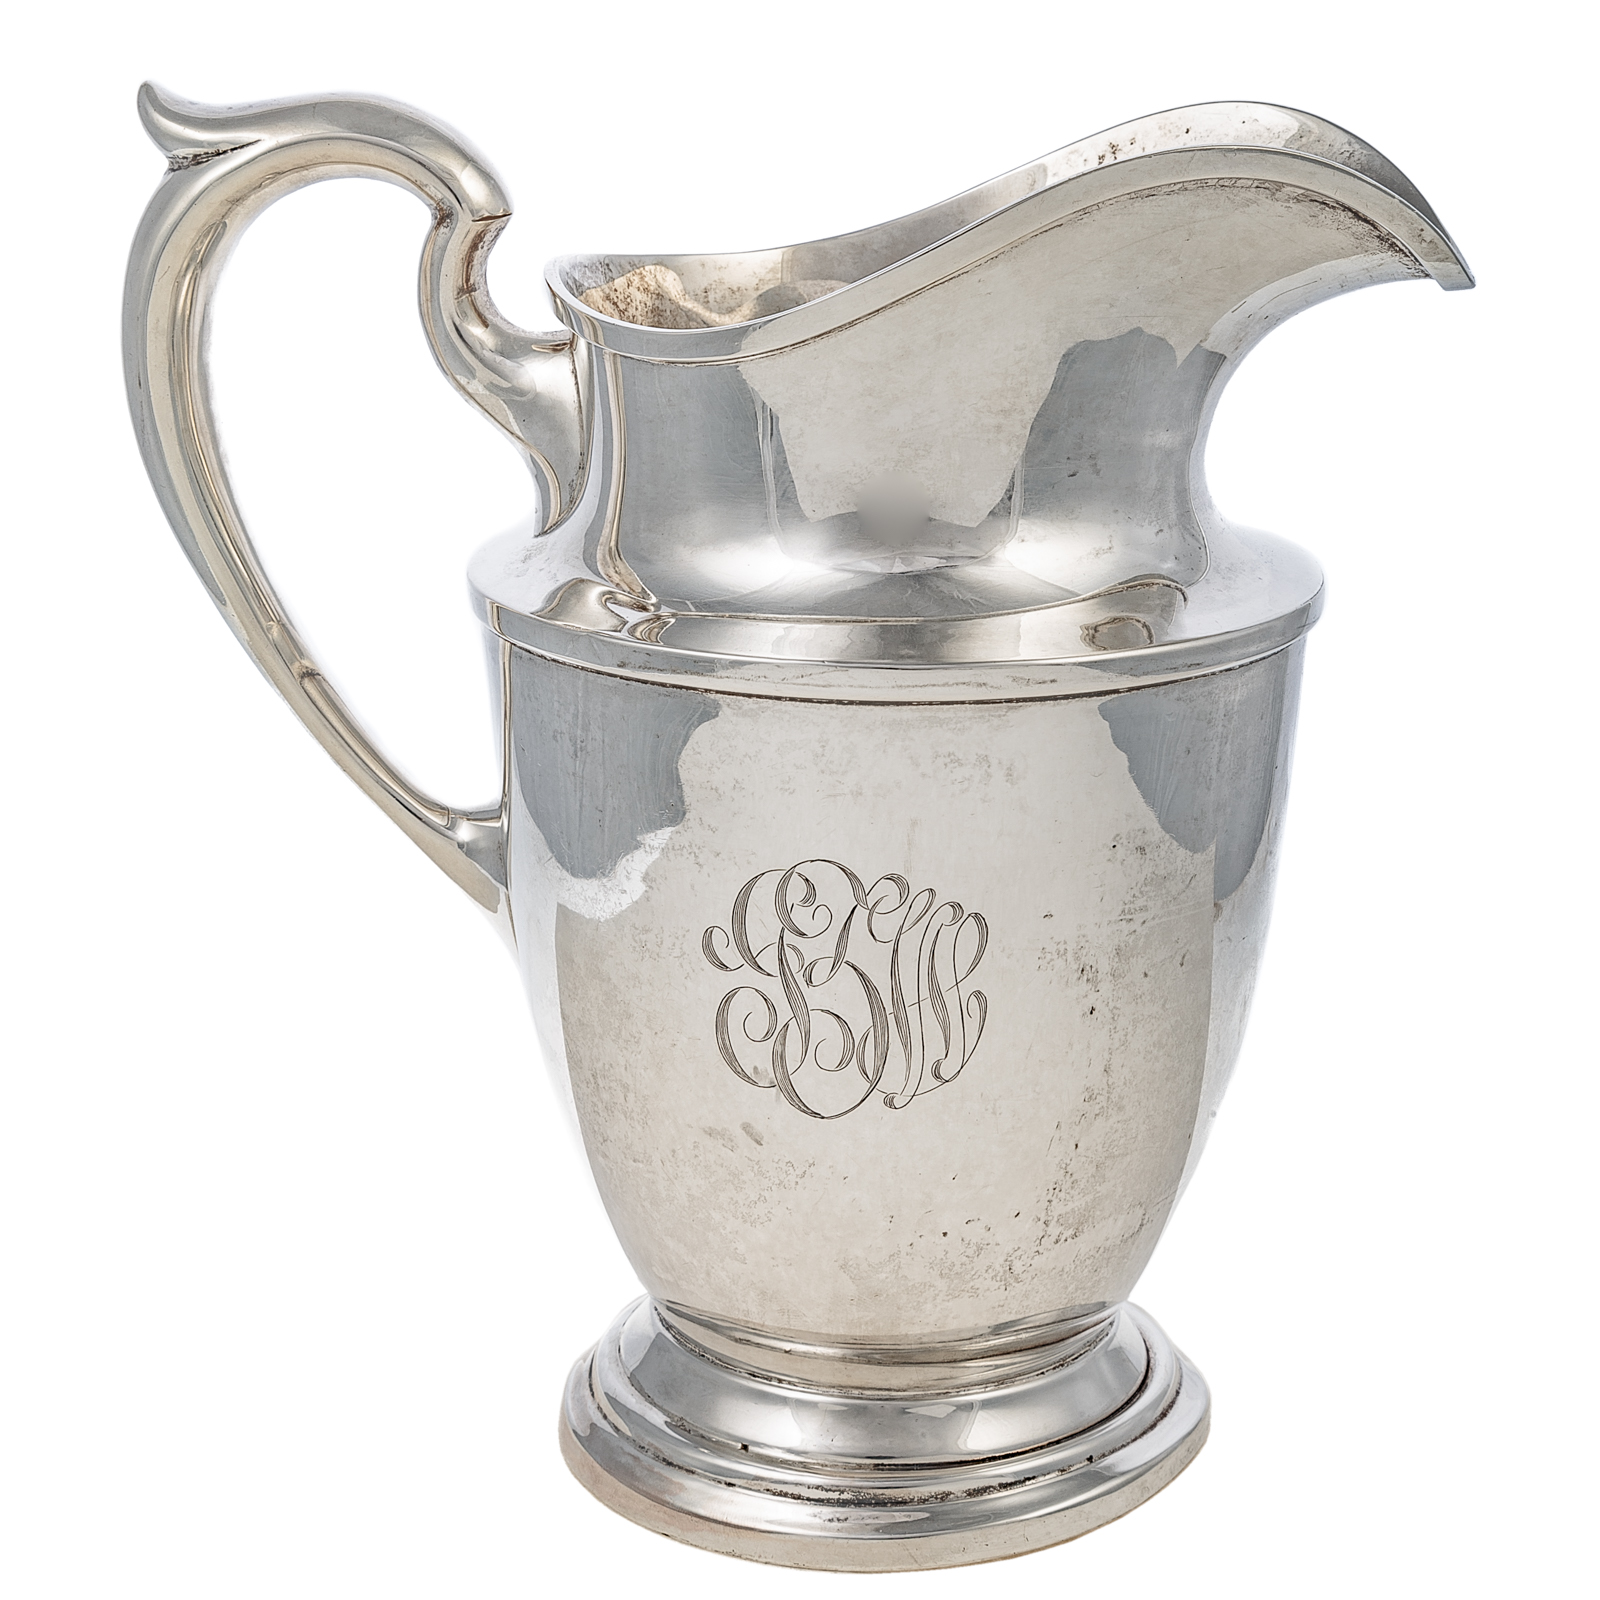 SCHOFIELD STERLING WATER PITCHER 28799e